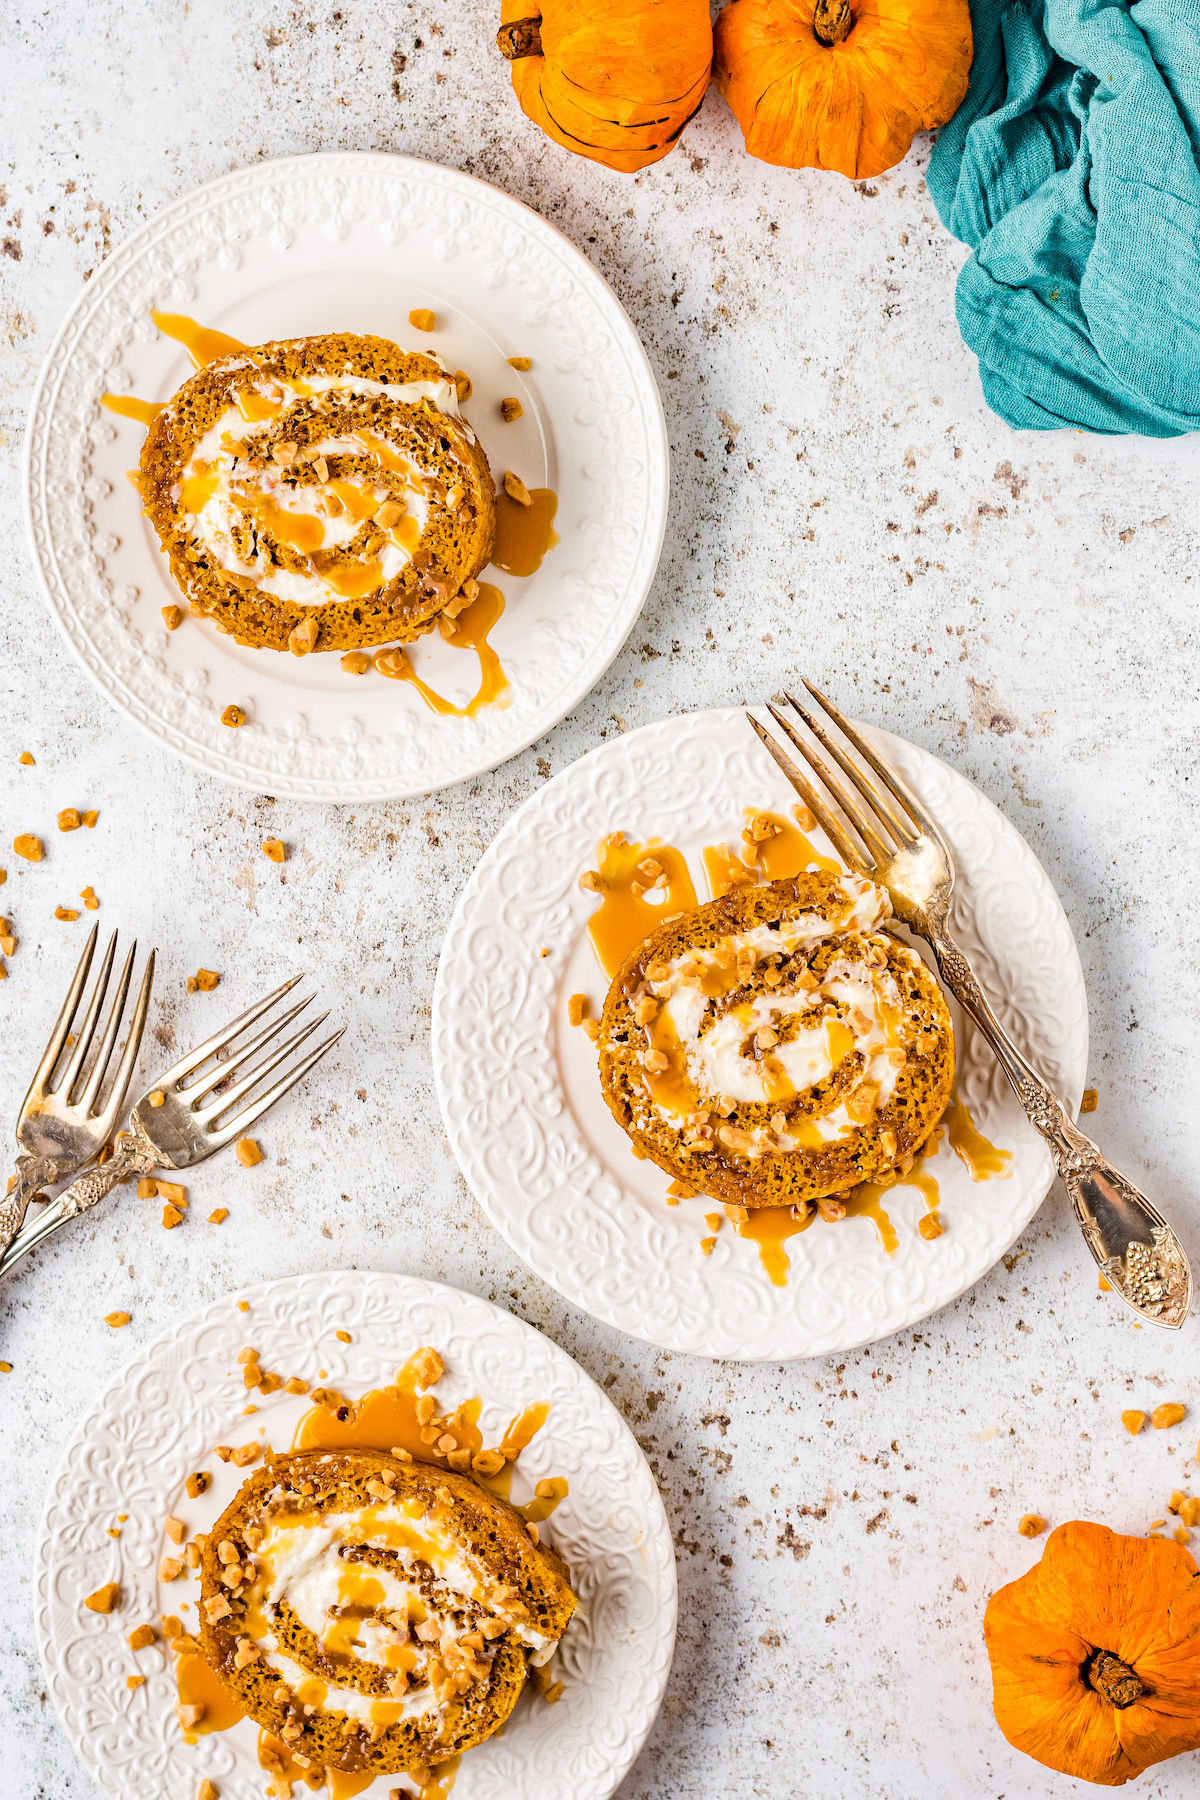 Servings of pumpkin spice jelly roll on dessert plates, garnished with caramel drizzle and toffee bits.